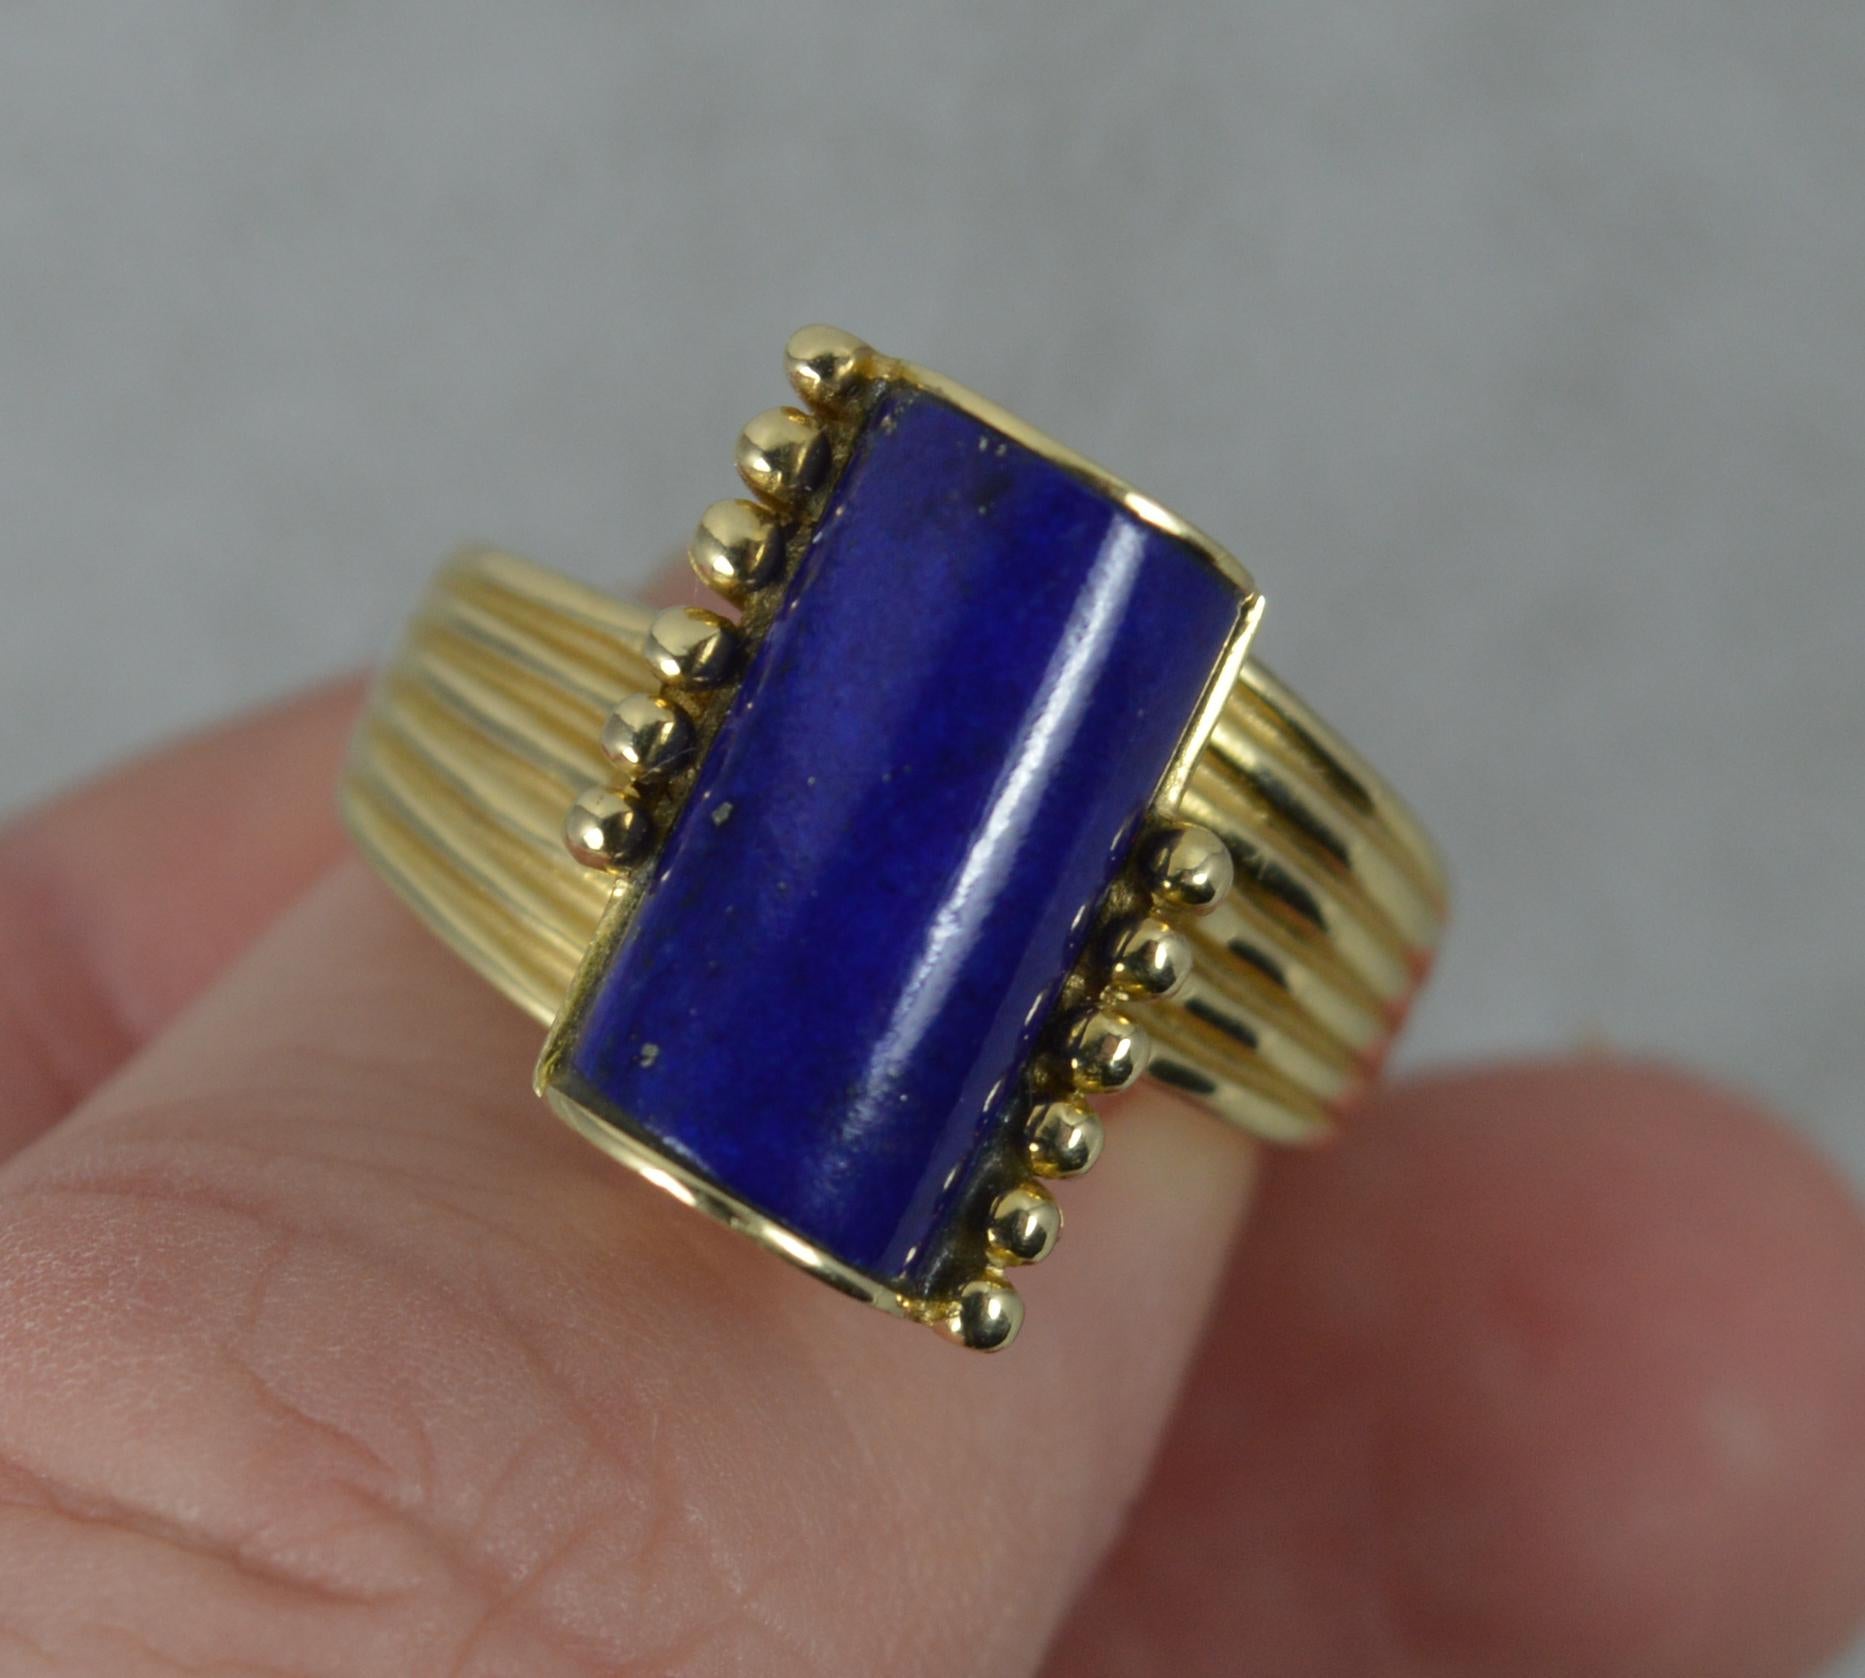 Stunning Lapis Lazuli and 14 Carat Gold Solitaire Statement Ring 5